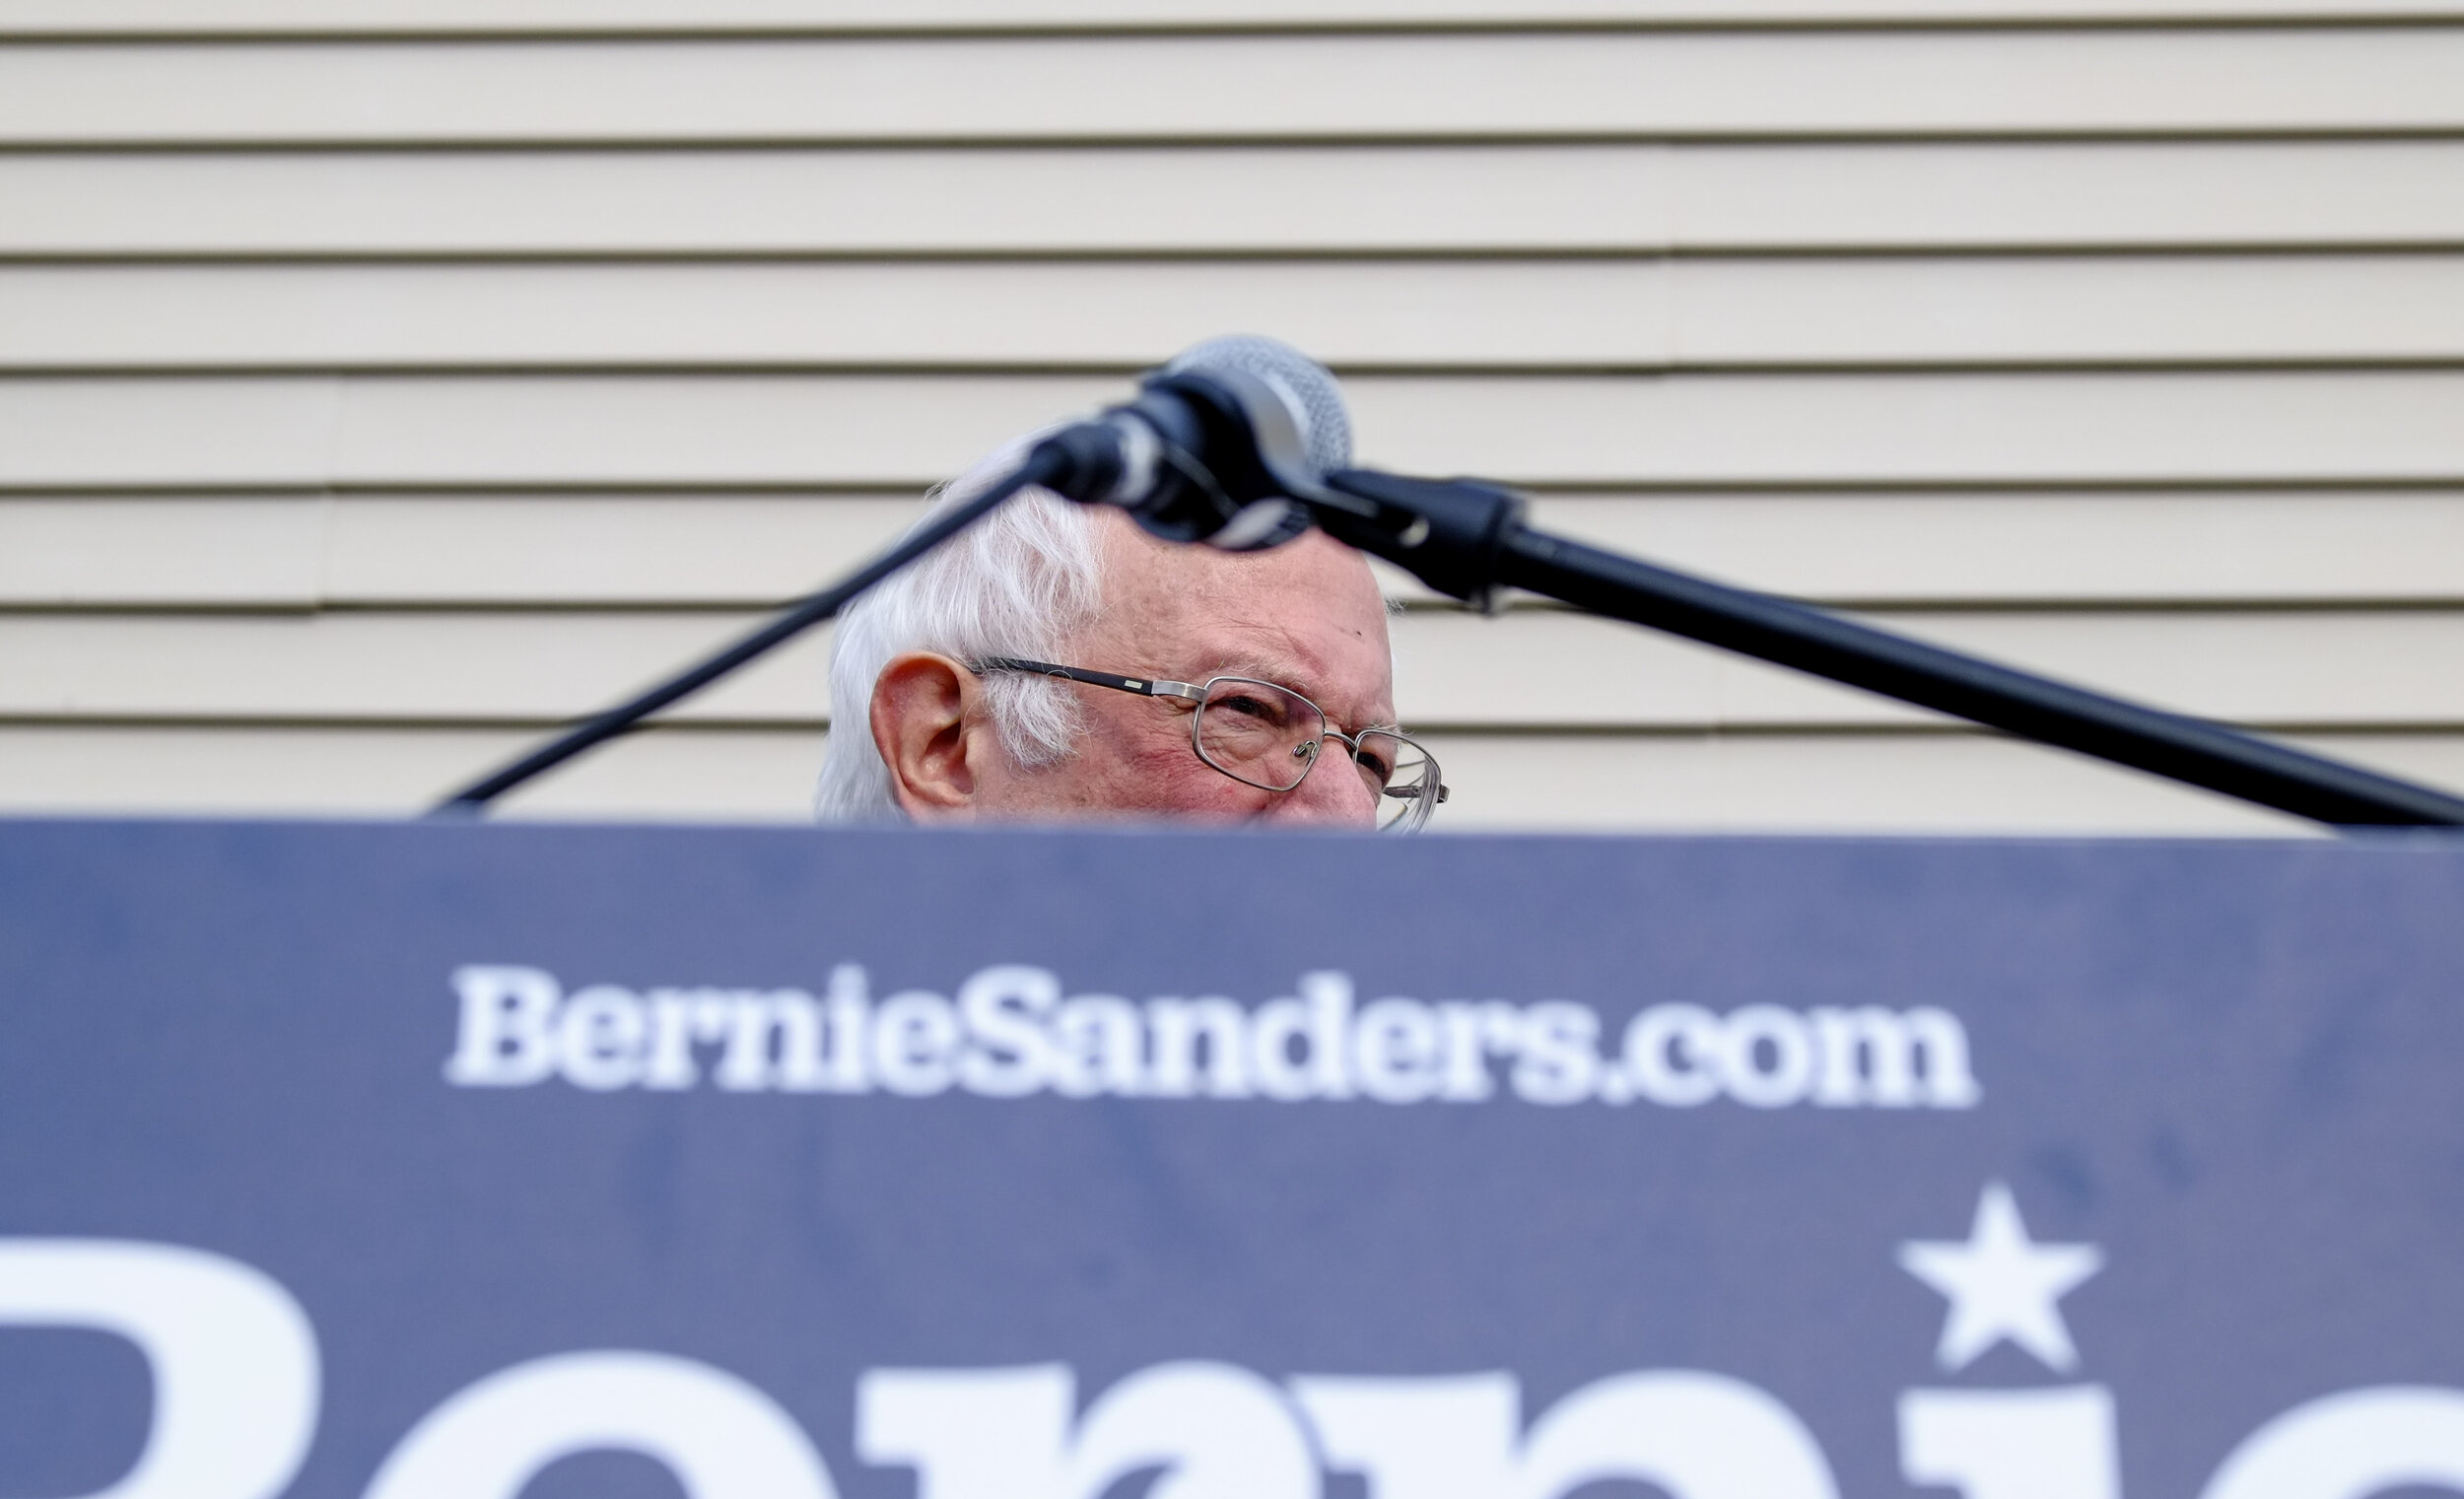  Democratic candidate Bernie Sanders leaves the podium after addressing a small crowd outside of Cedar Rapids, Iowa the day before the Iowa Caucuses on February 2, 2020. 